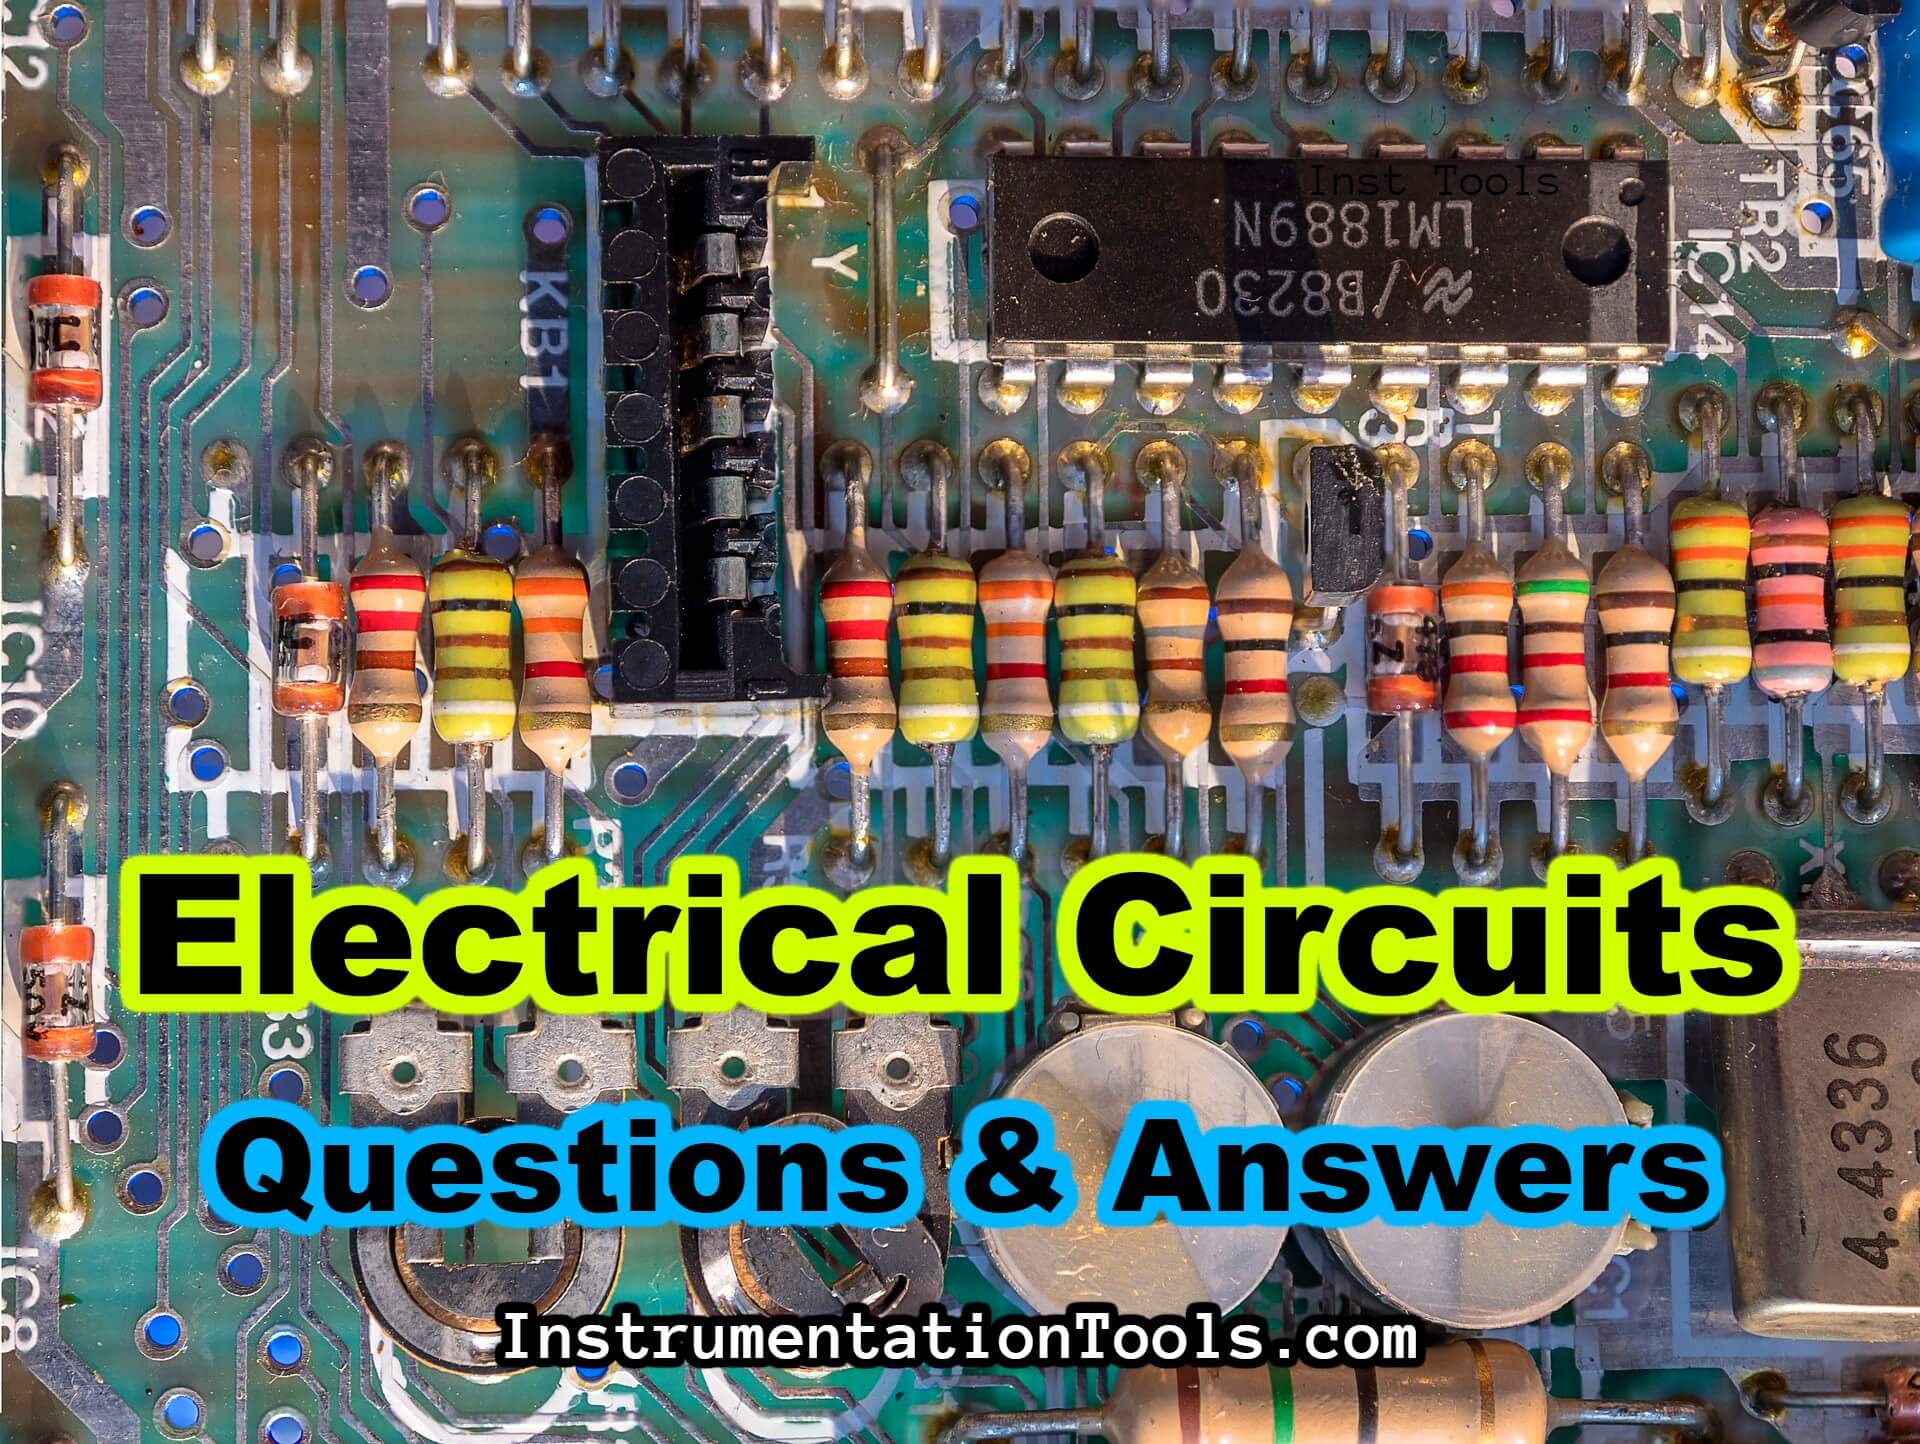 Top 300 Electrical Circuits Objective Questions and Answers